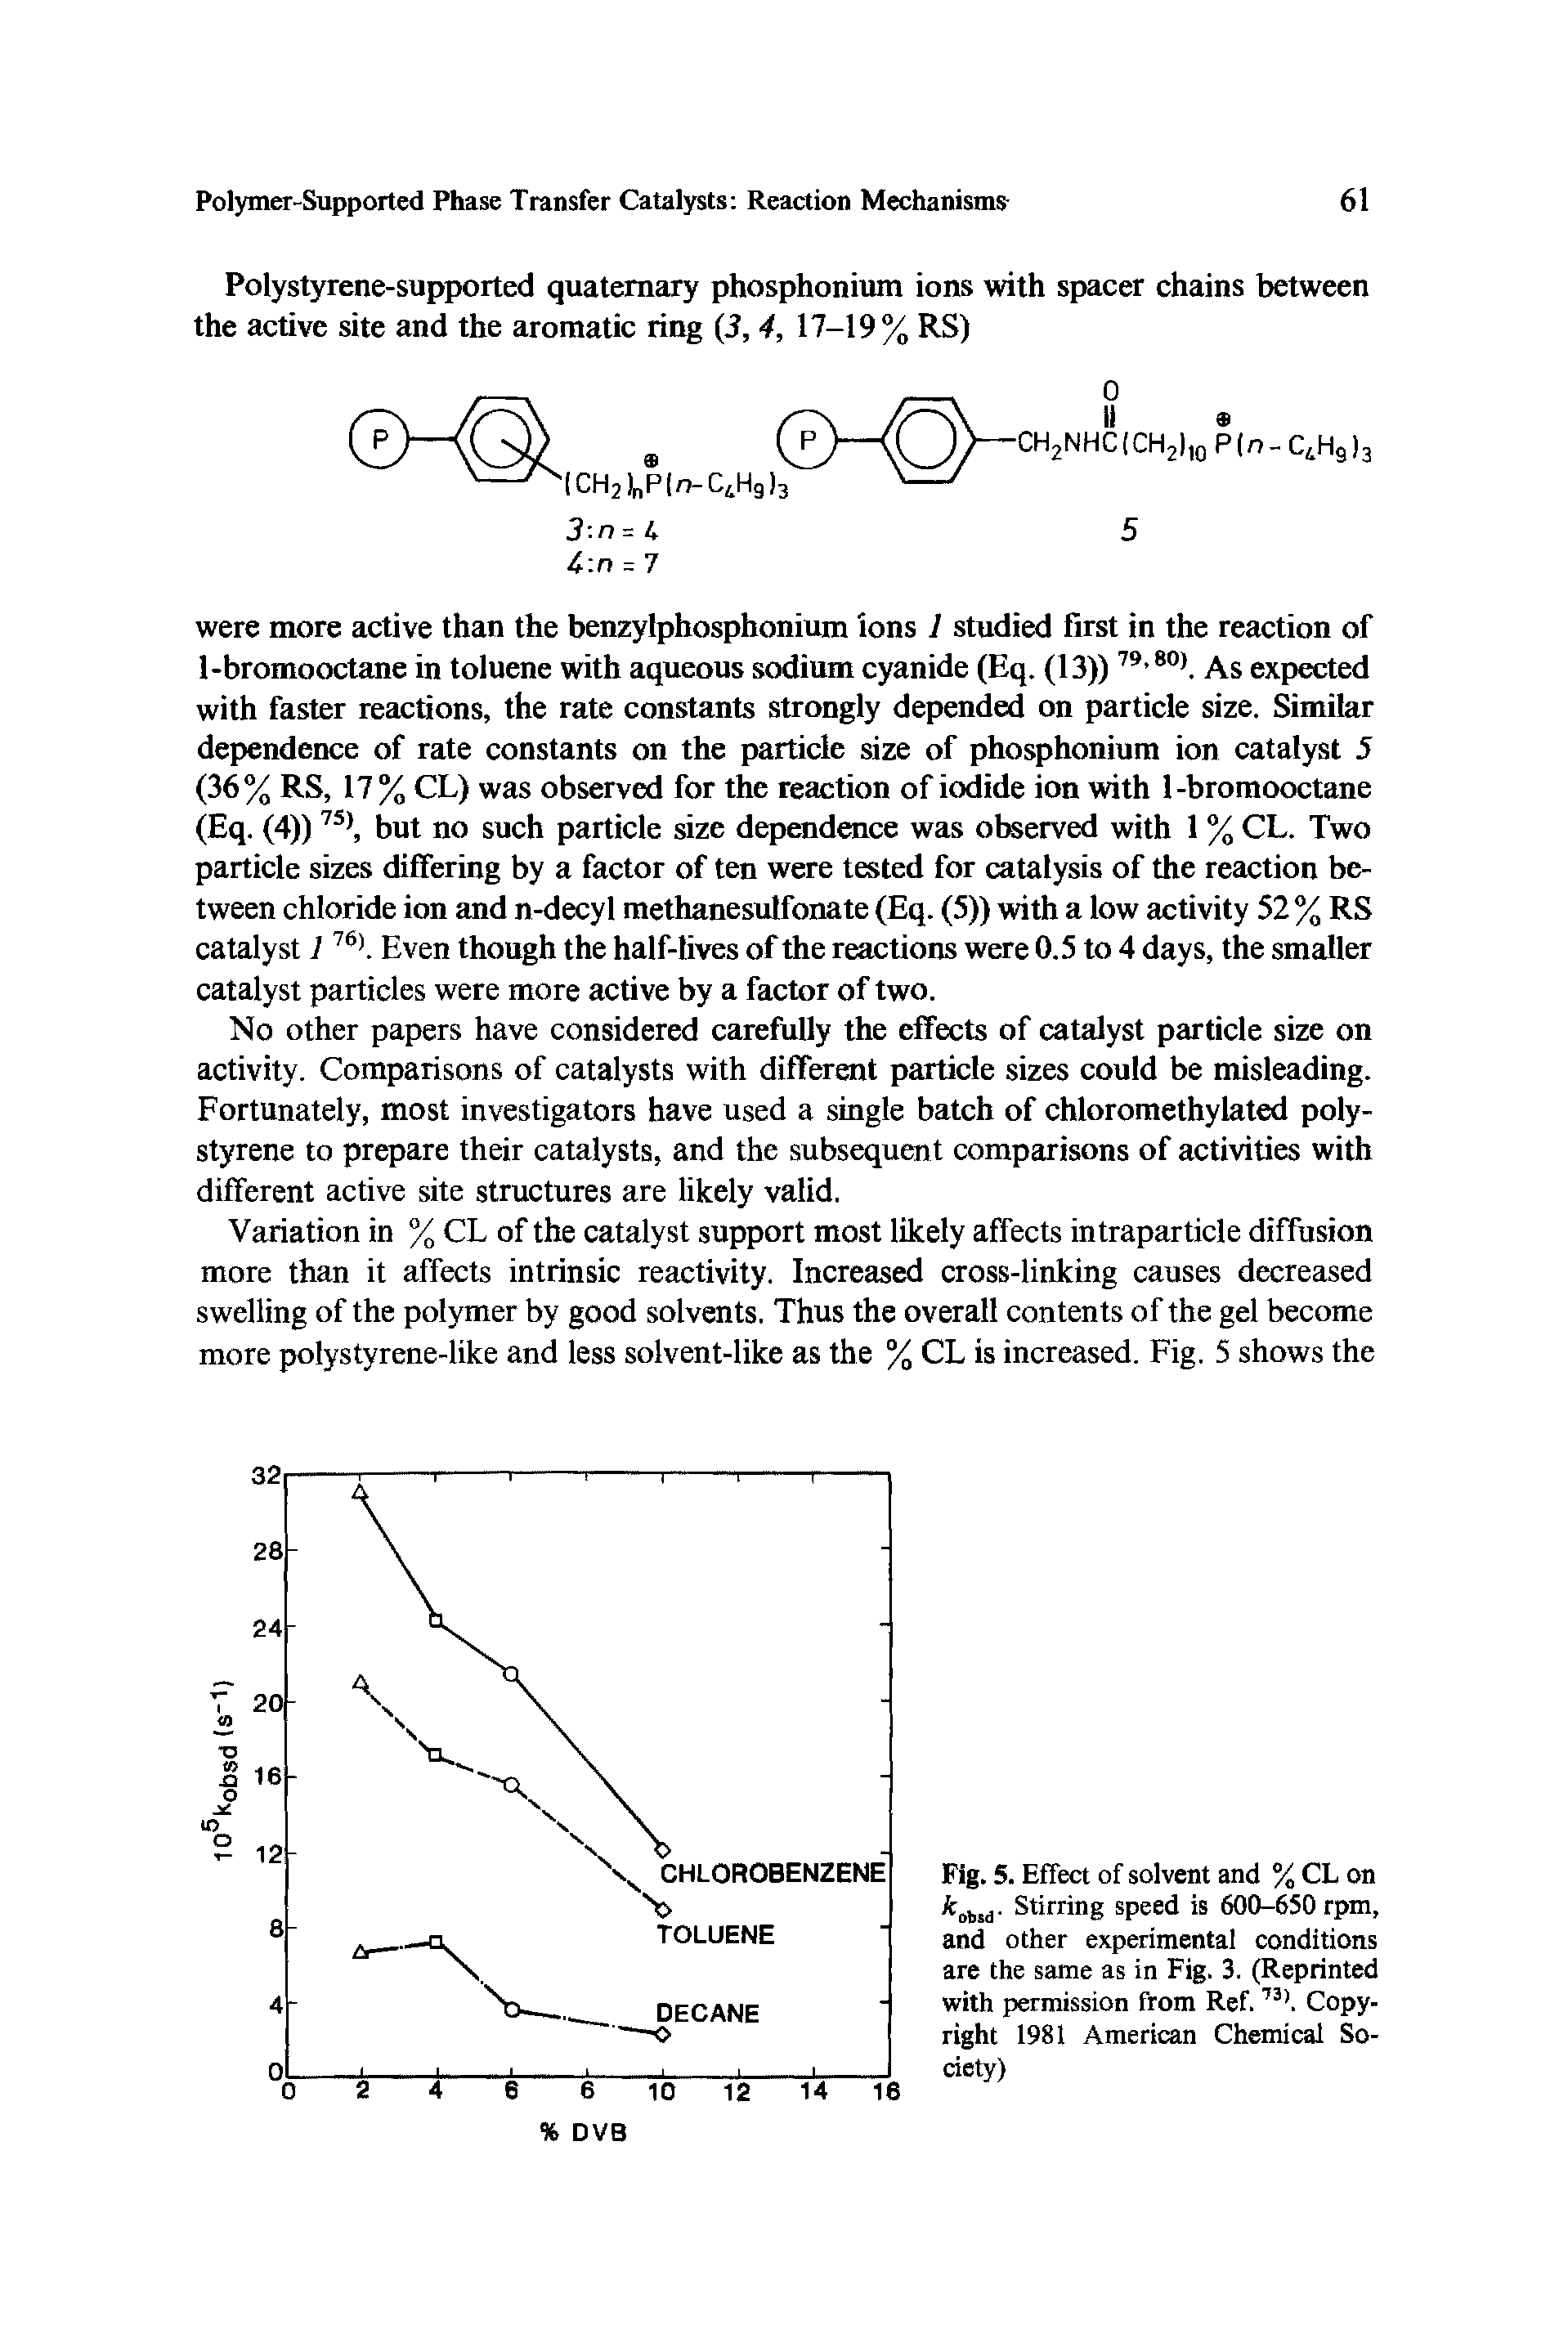 Fig. 5. Effect of solvent and % CL on kobsd. Stirring speed is 600-650 rpm, and other experimental conditions are the same as in Fig. 3. (Reprinted with permission from Ref. 73). Copyright 1981 American Chemical Society)...